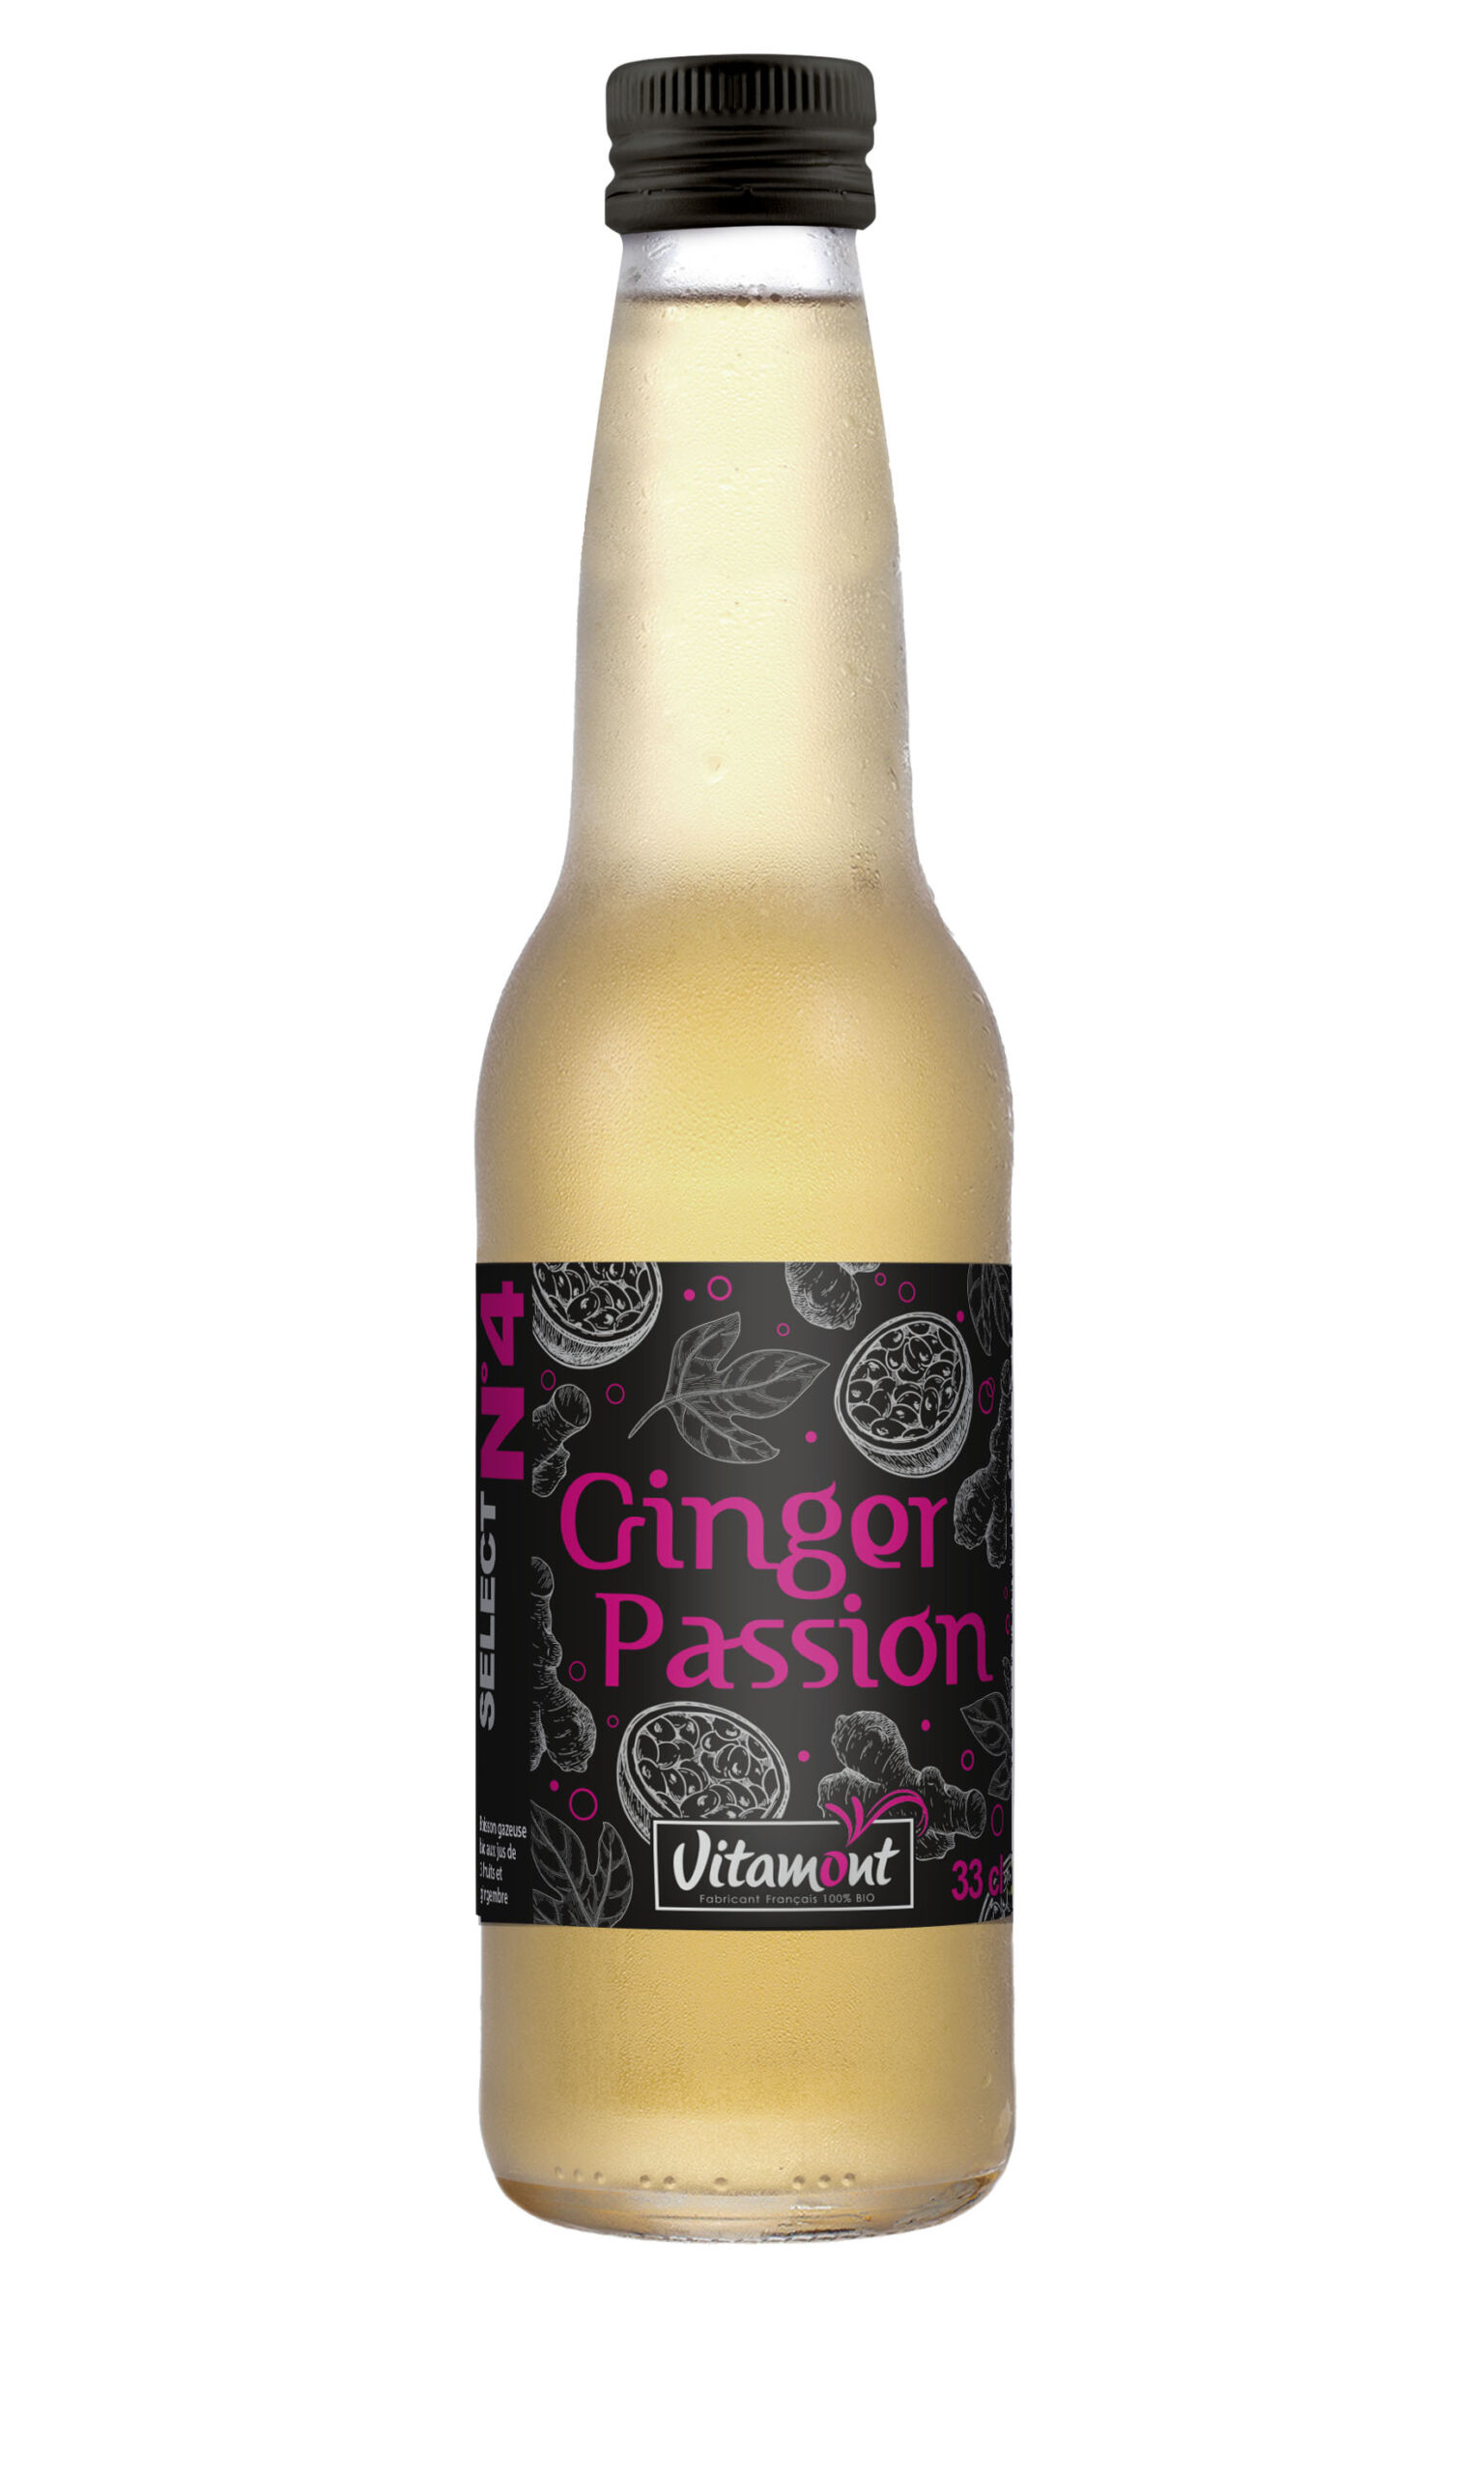 N°4 Ginger Passion